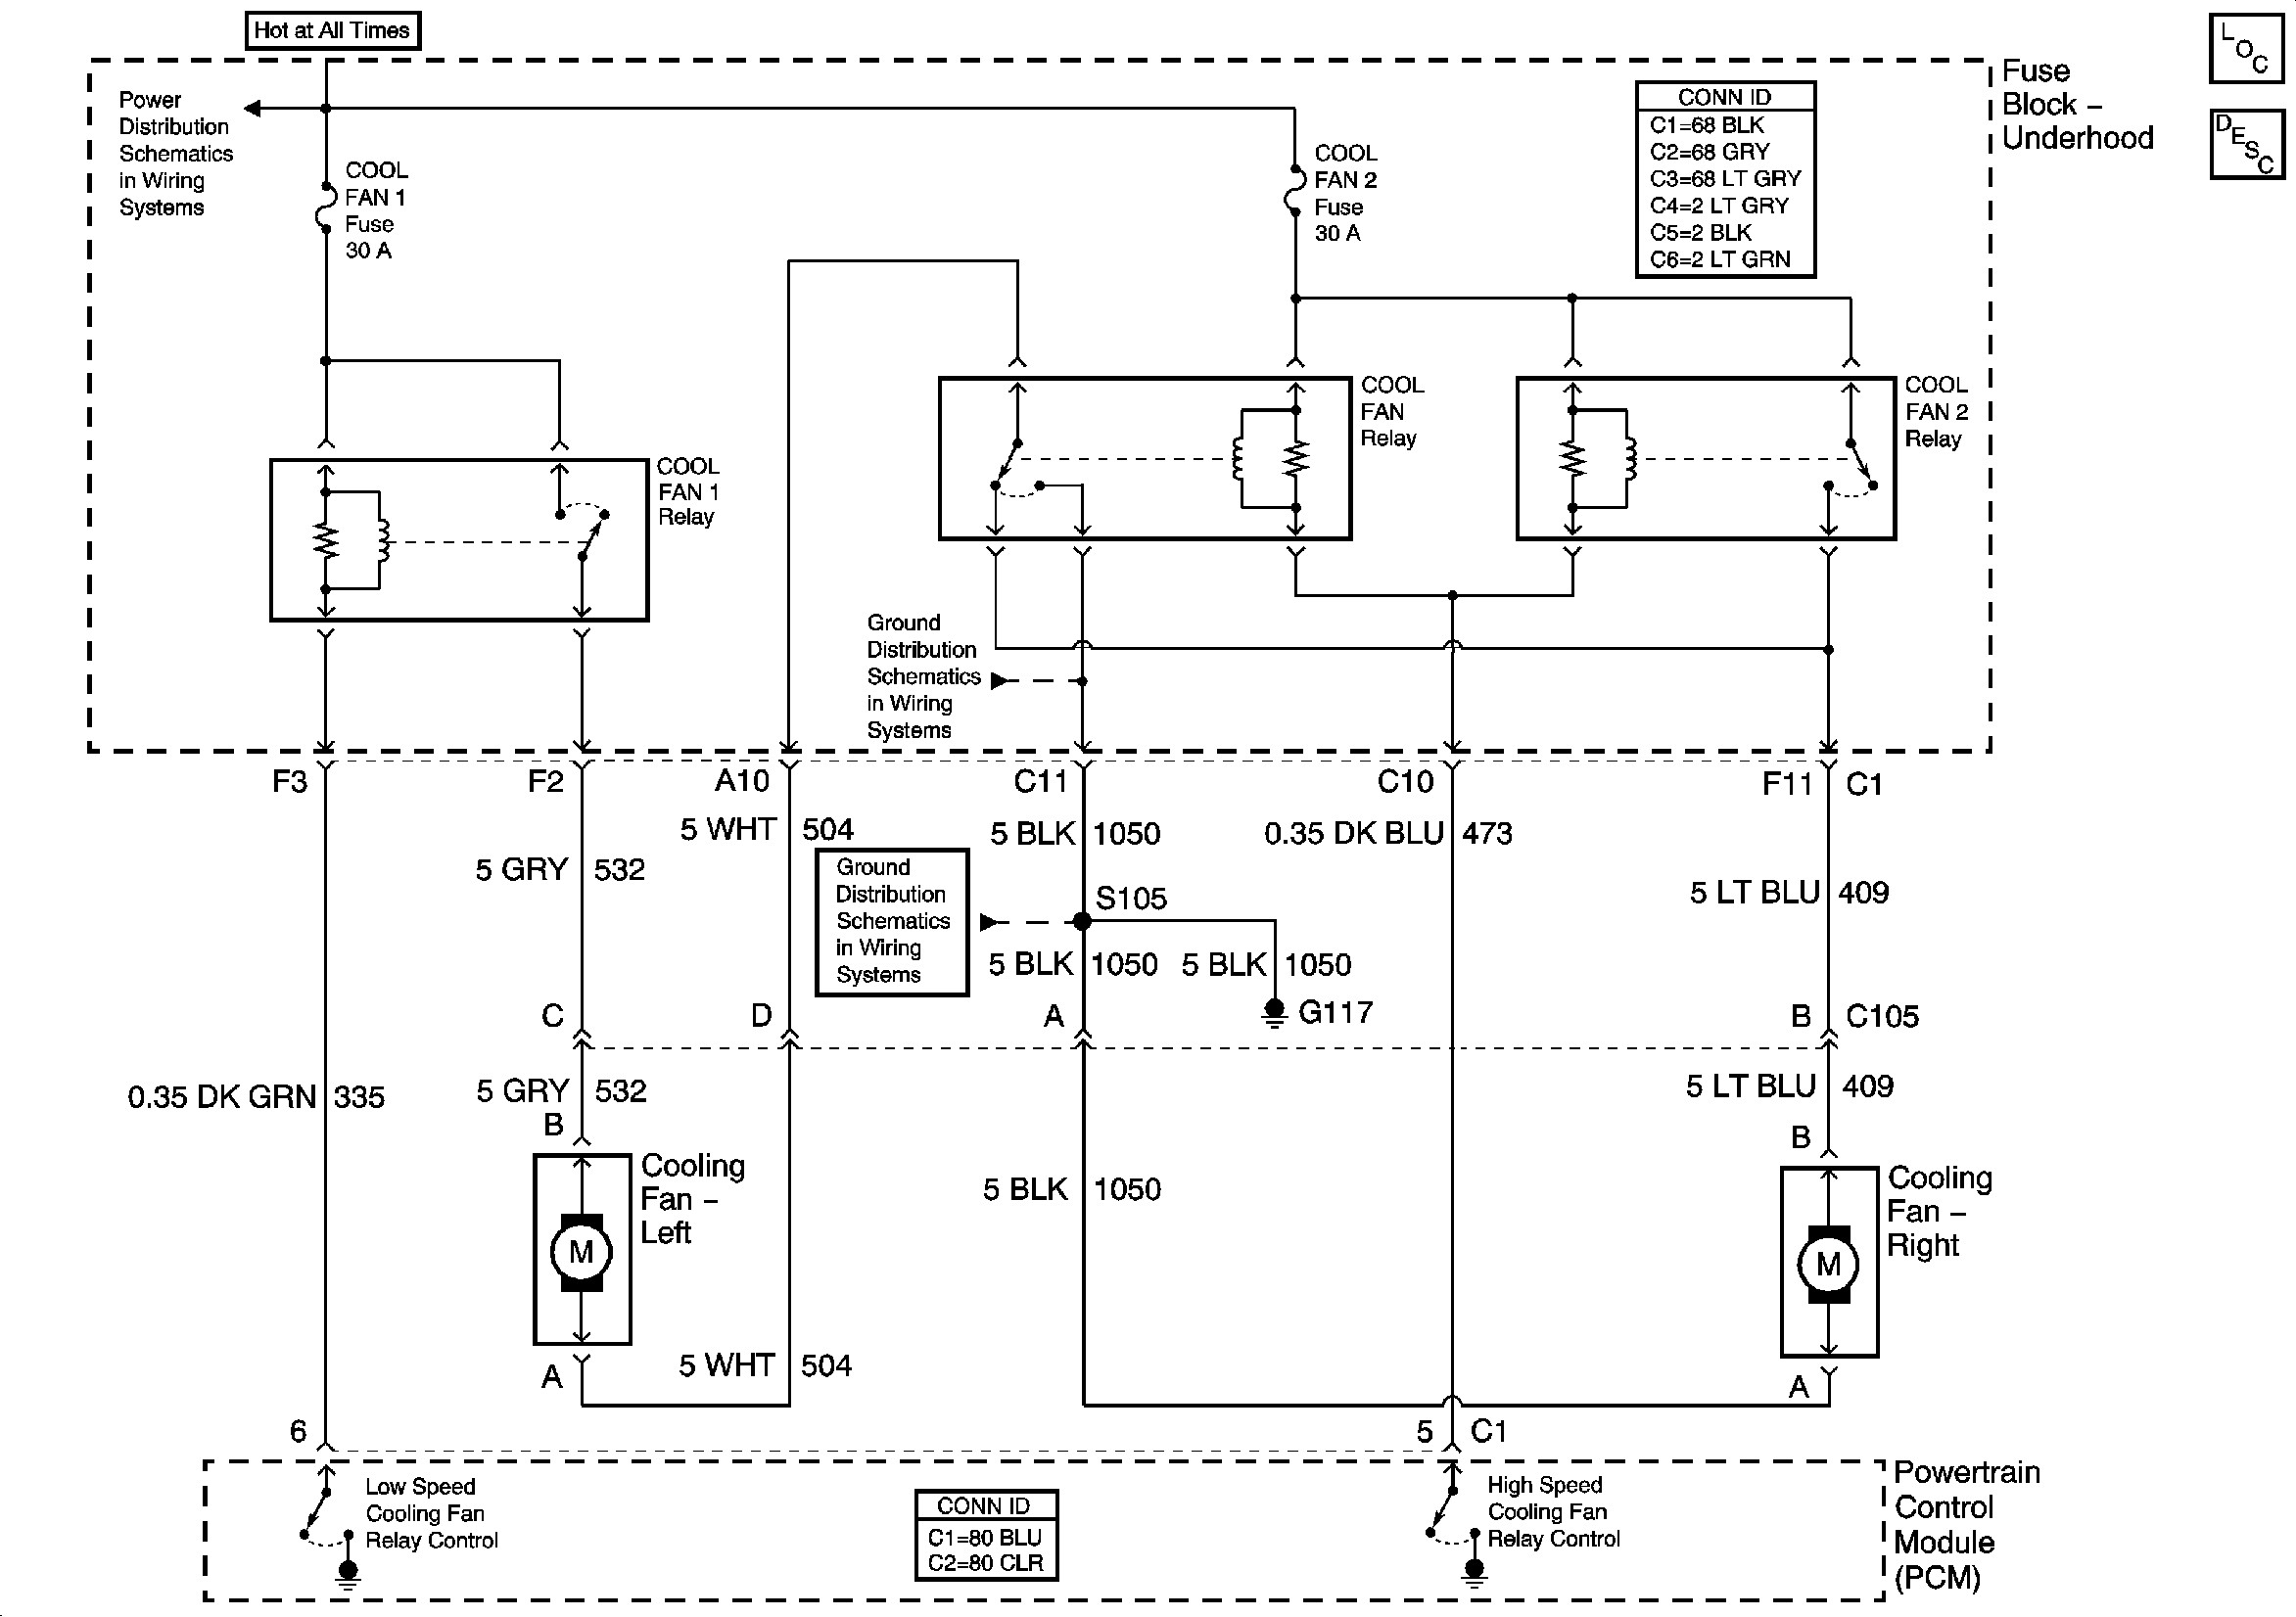 2001 Chevy Malibu 3 1 Engine Diagram Diagram Likewise Cooling Fan Relay Wiring Diagram to Her with 04 Of 2001 Chevy Malibu 3 1 Engine Diagram